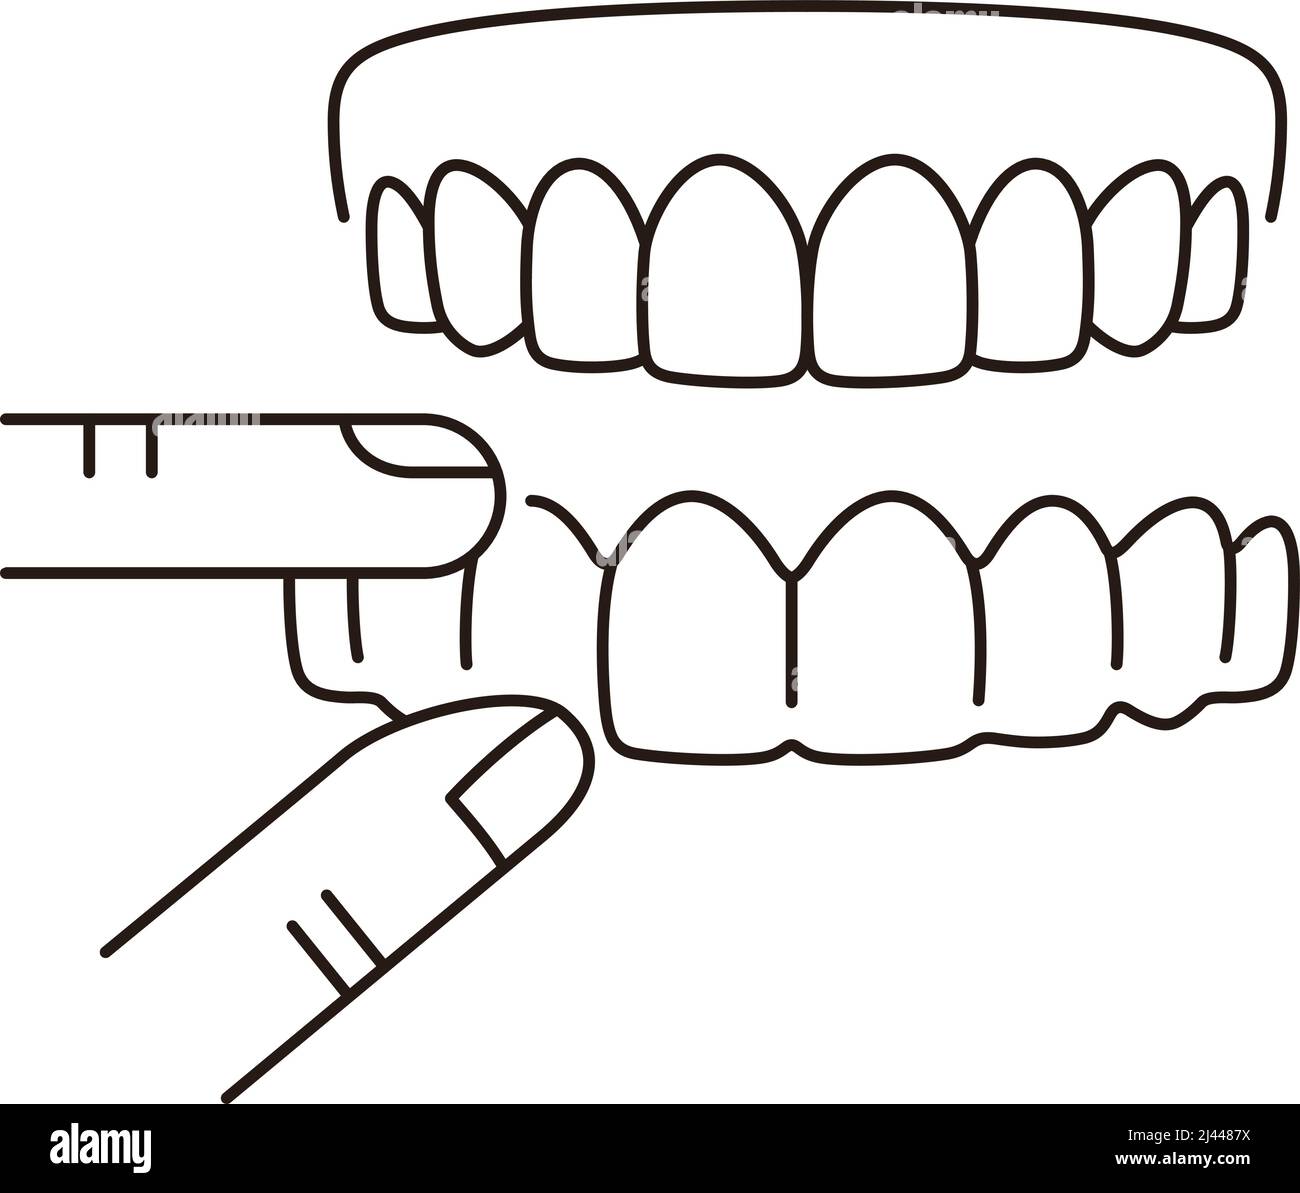 Teeth invisible braces thin line art icons Stock Vector